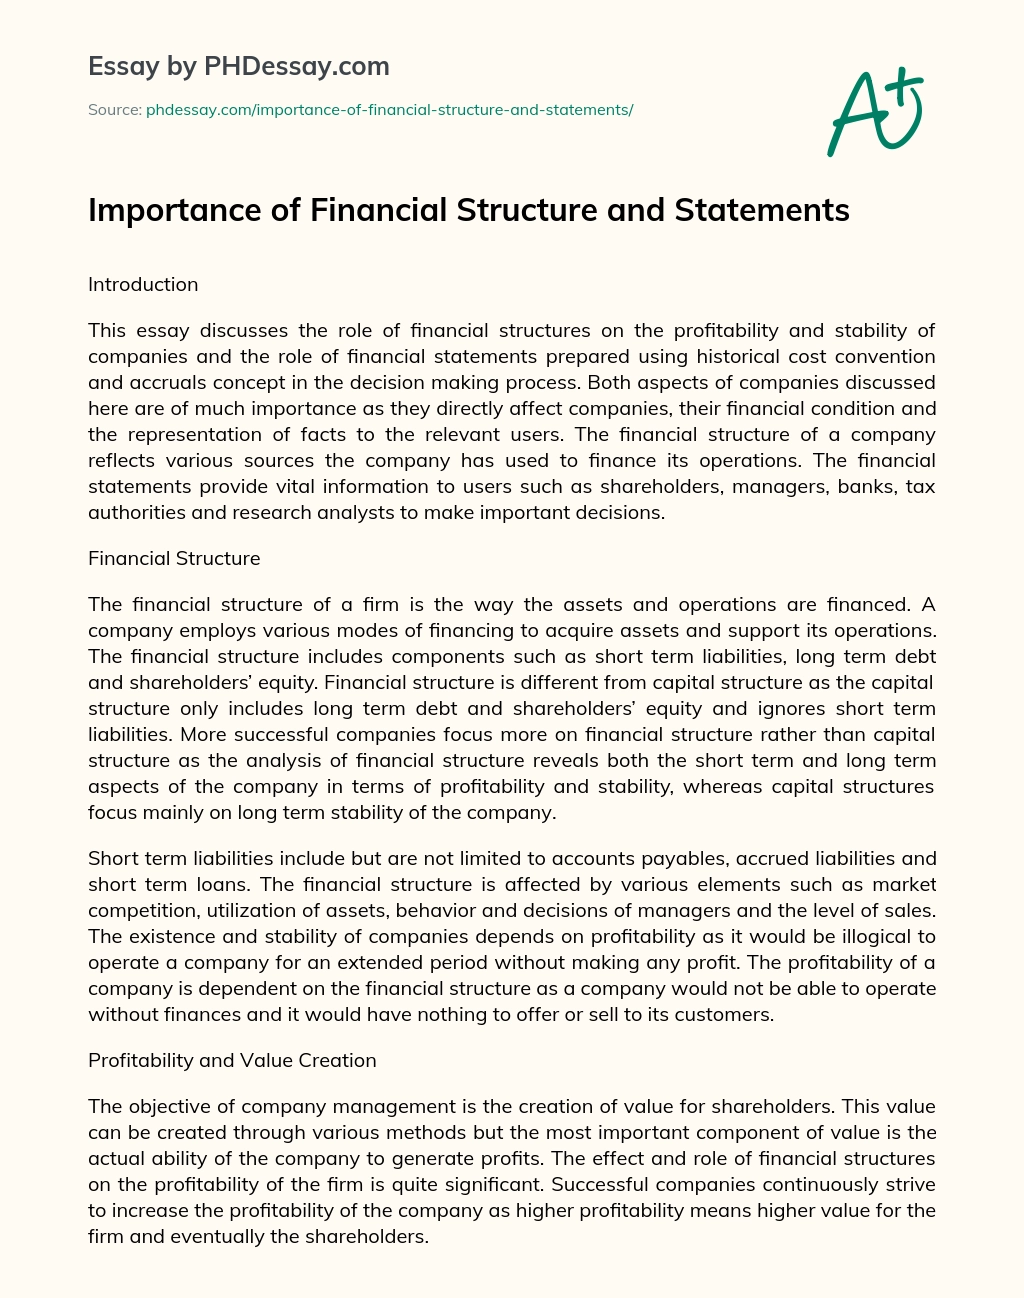 Importance of Financial Structure and Statements essay